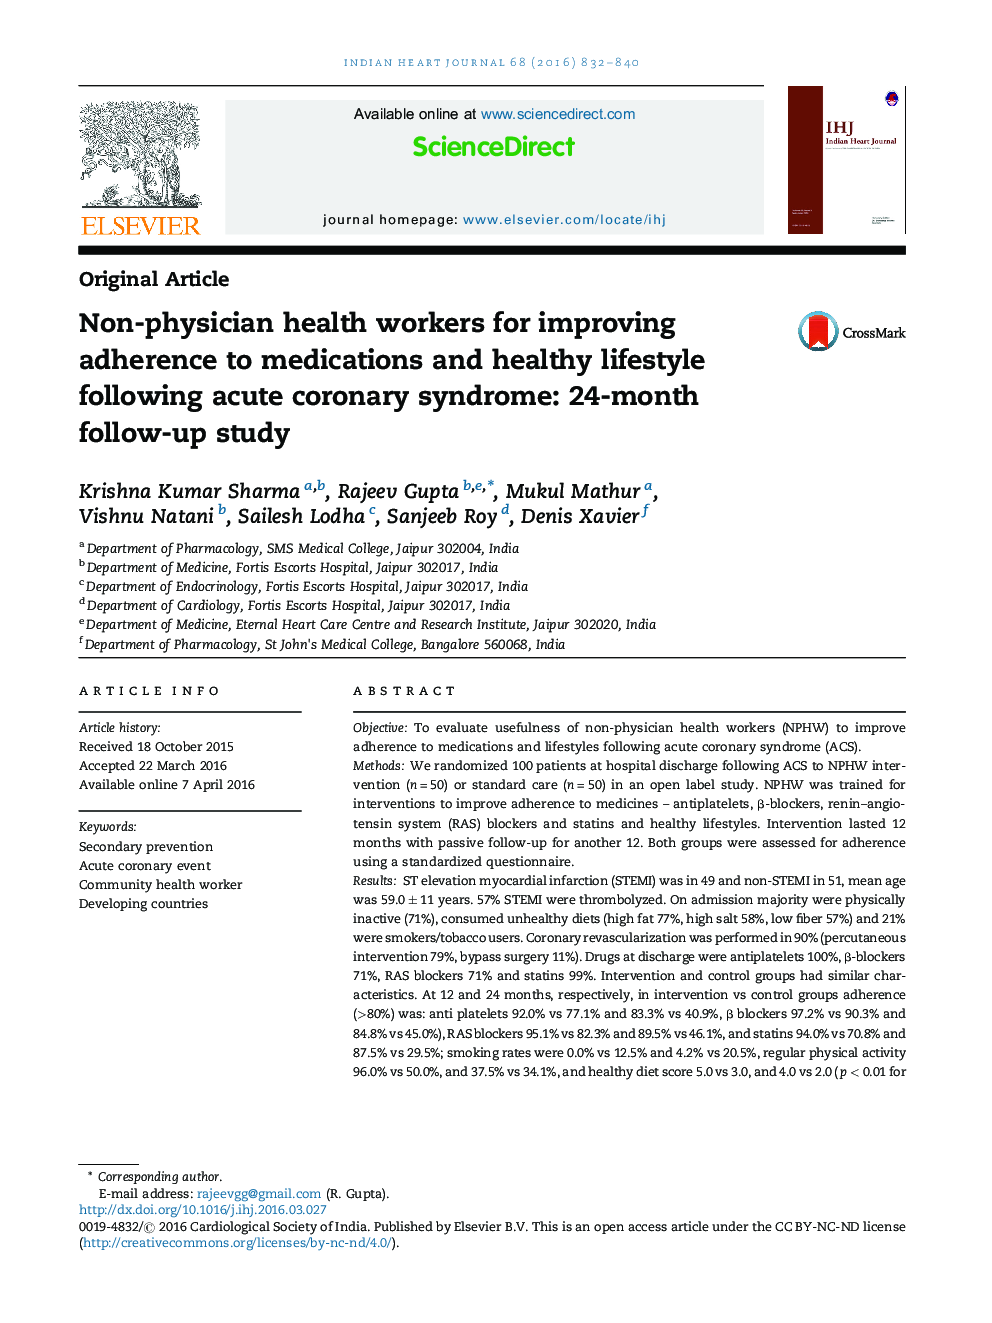 Original ArticleNon-physician health workers for improving adherence to medications and healthy lifestyle following acute coronary syndrome: 24-month follow-up study